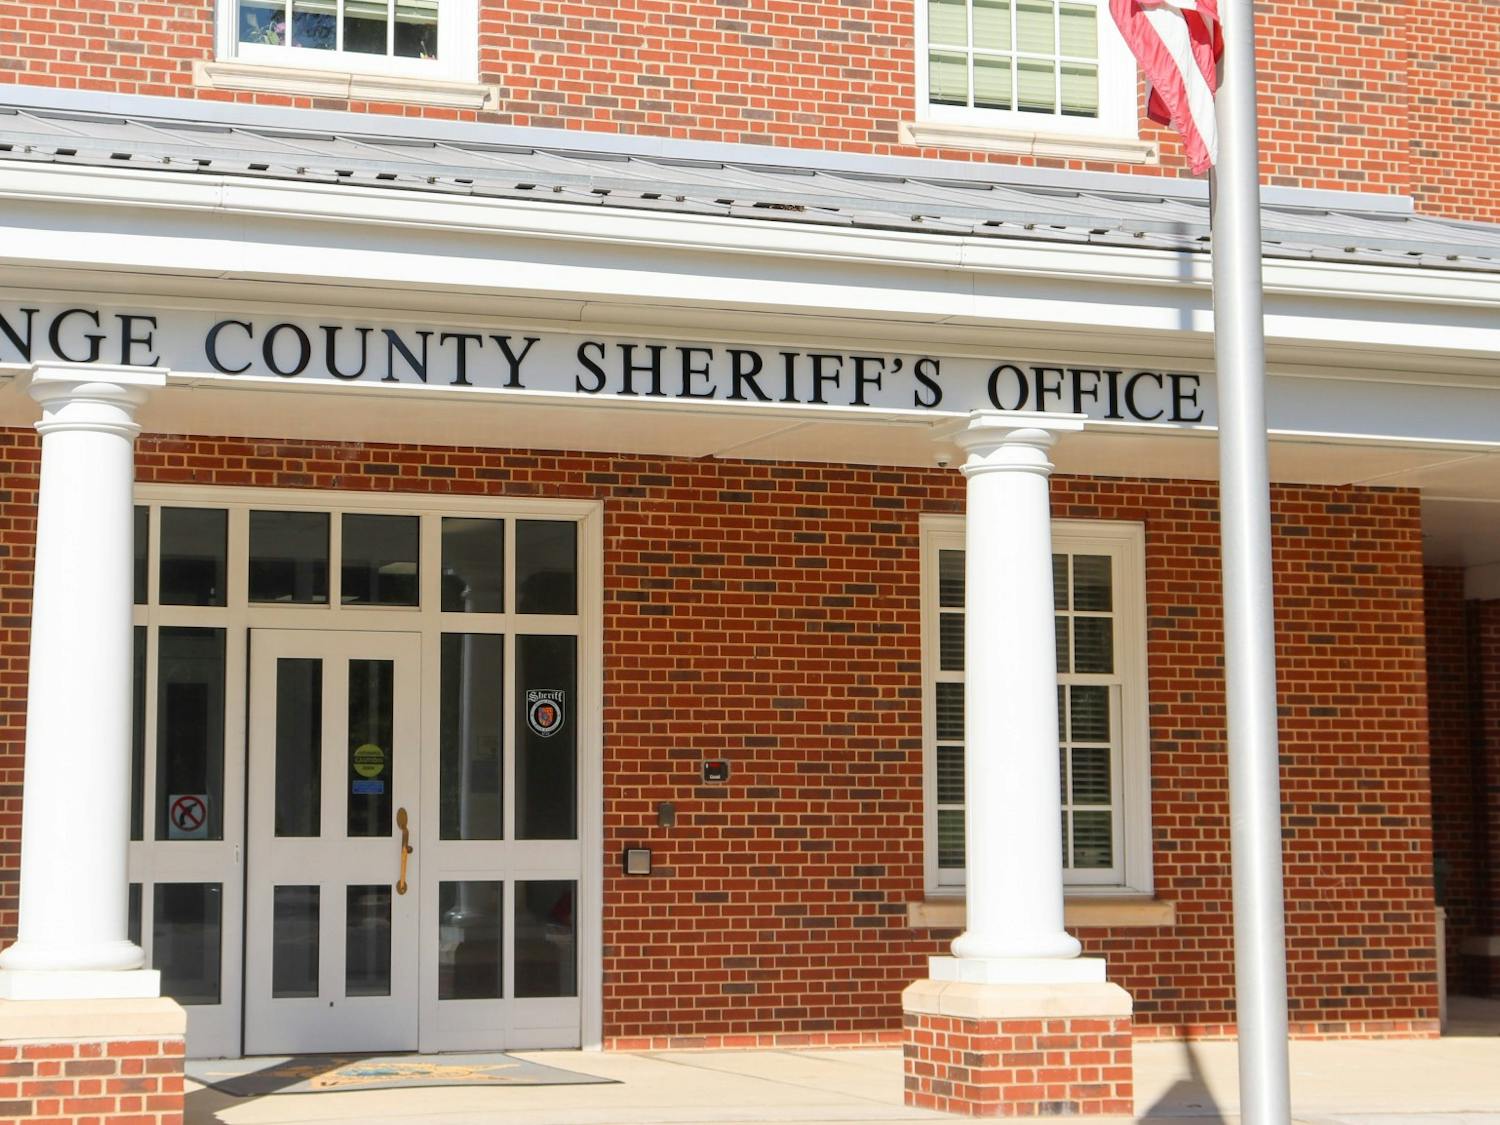 The Orange County Sheriff's Office, located in Hillsborough, is pictured on Tuesday, Sept. 20, 2022.